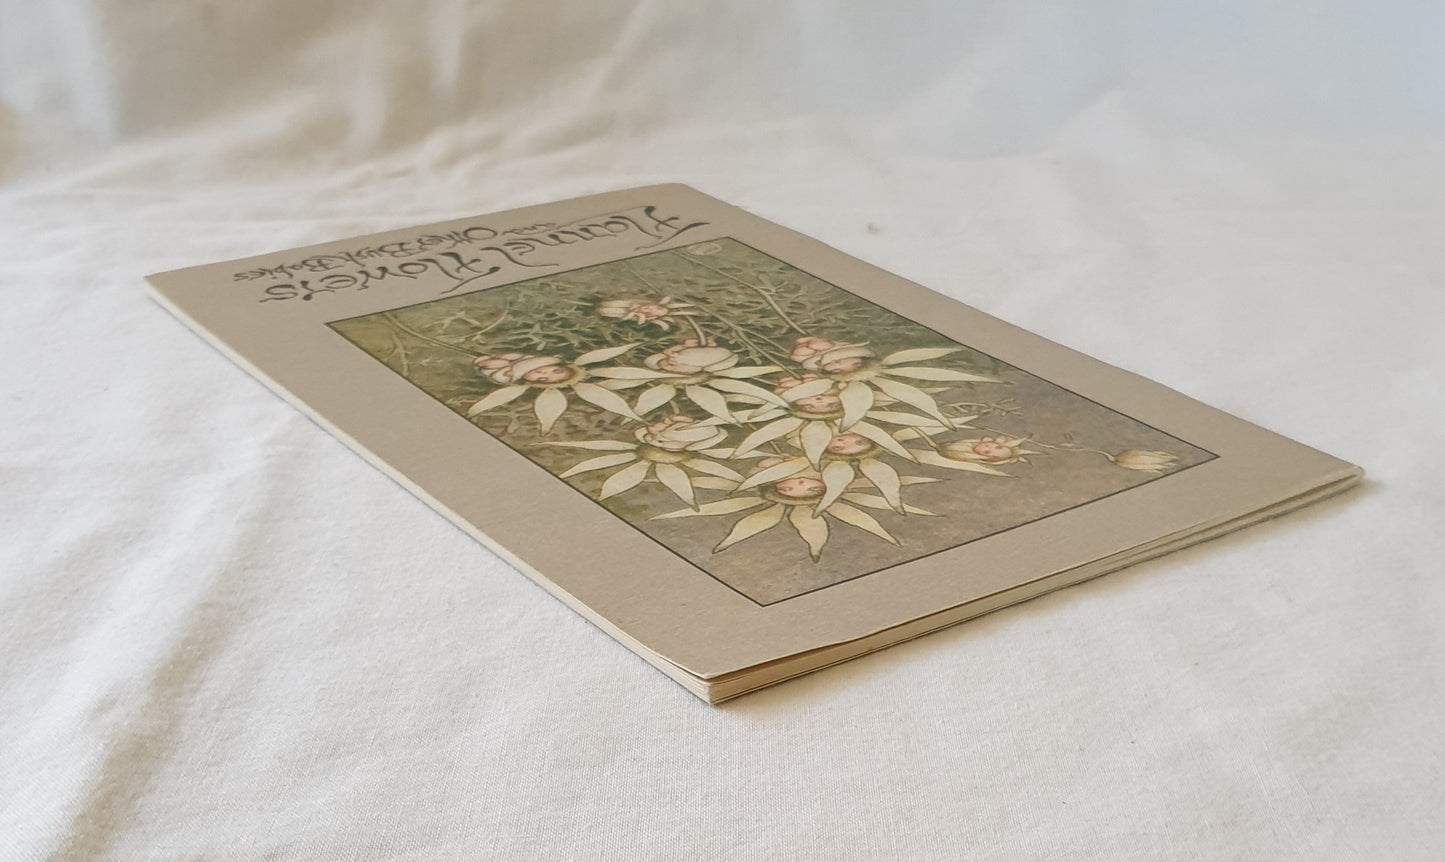 Flannel Flowers and Other Bush Babies  by May Gibbs